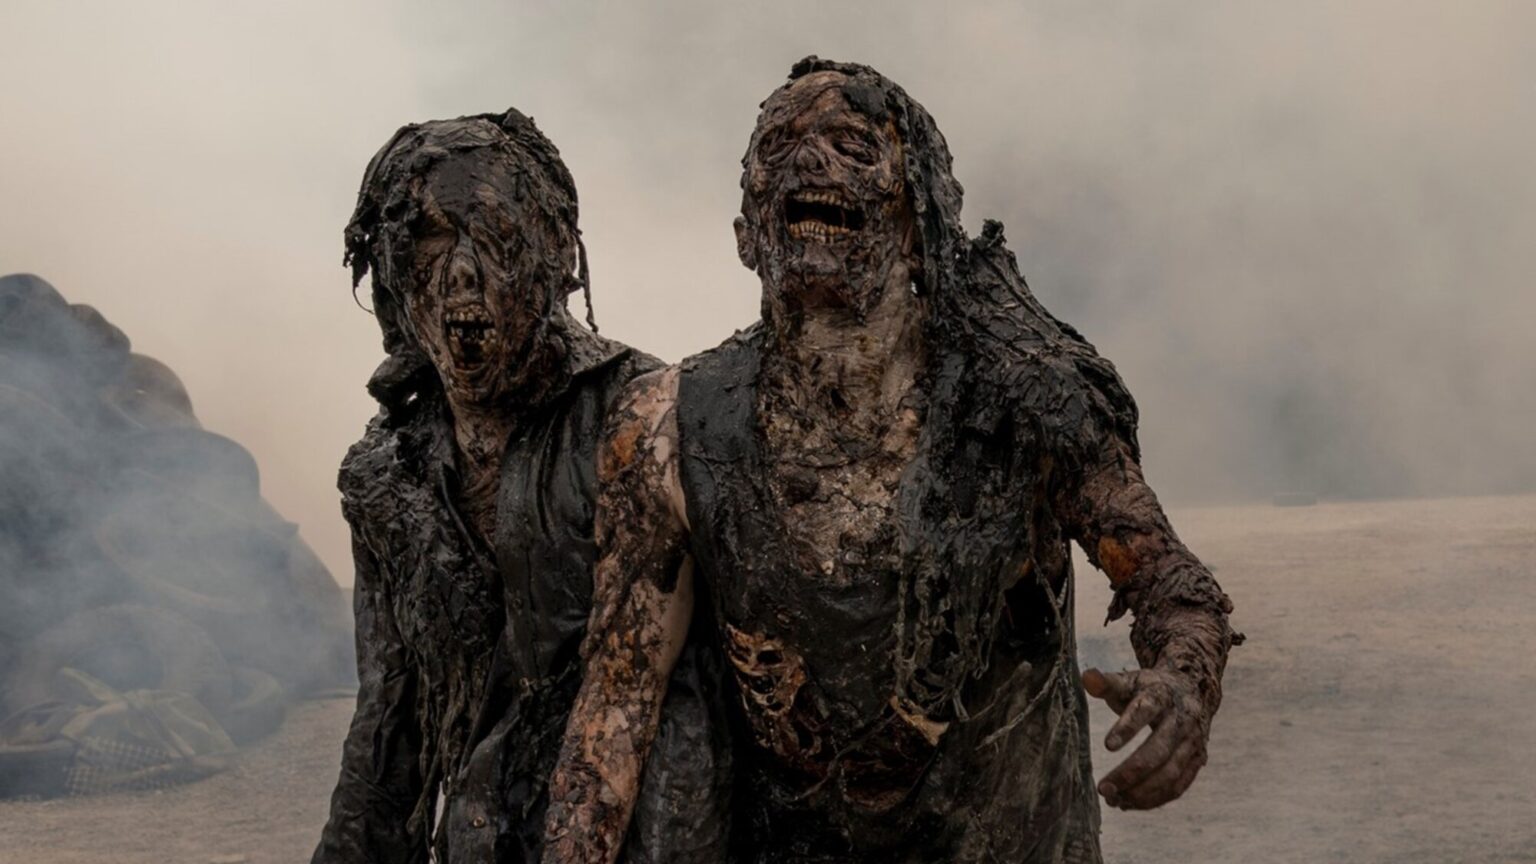 Will the 'Walking Dead' on AMC ever die? Find out why all the spin-offs from the hit series have the story rising from the grave.